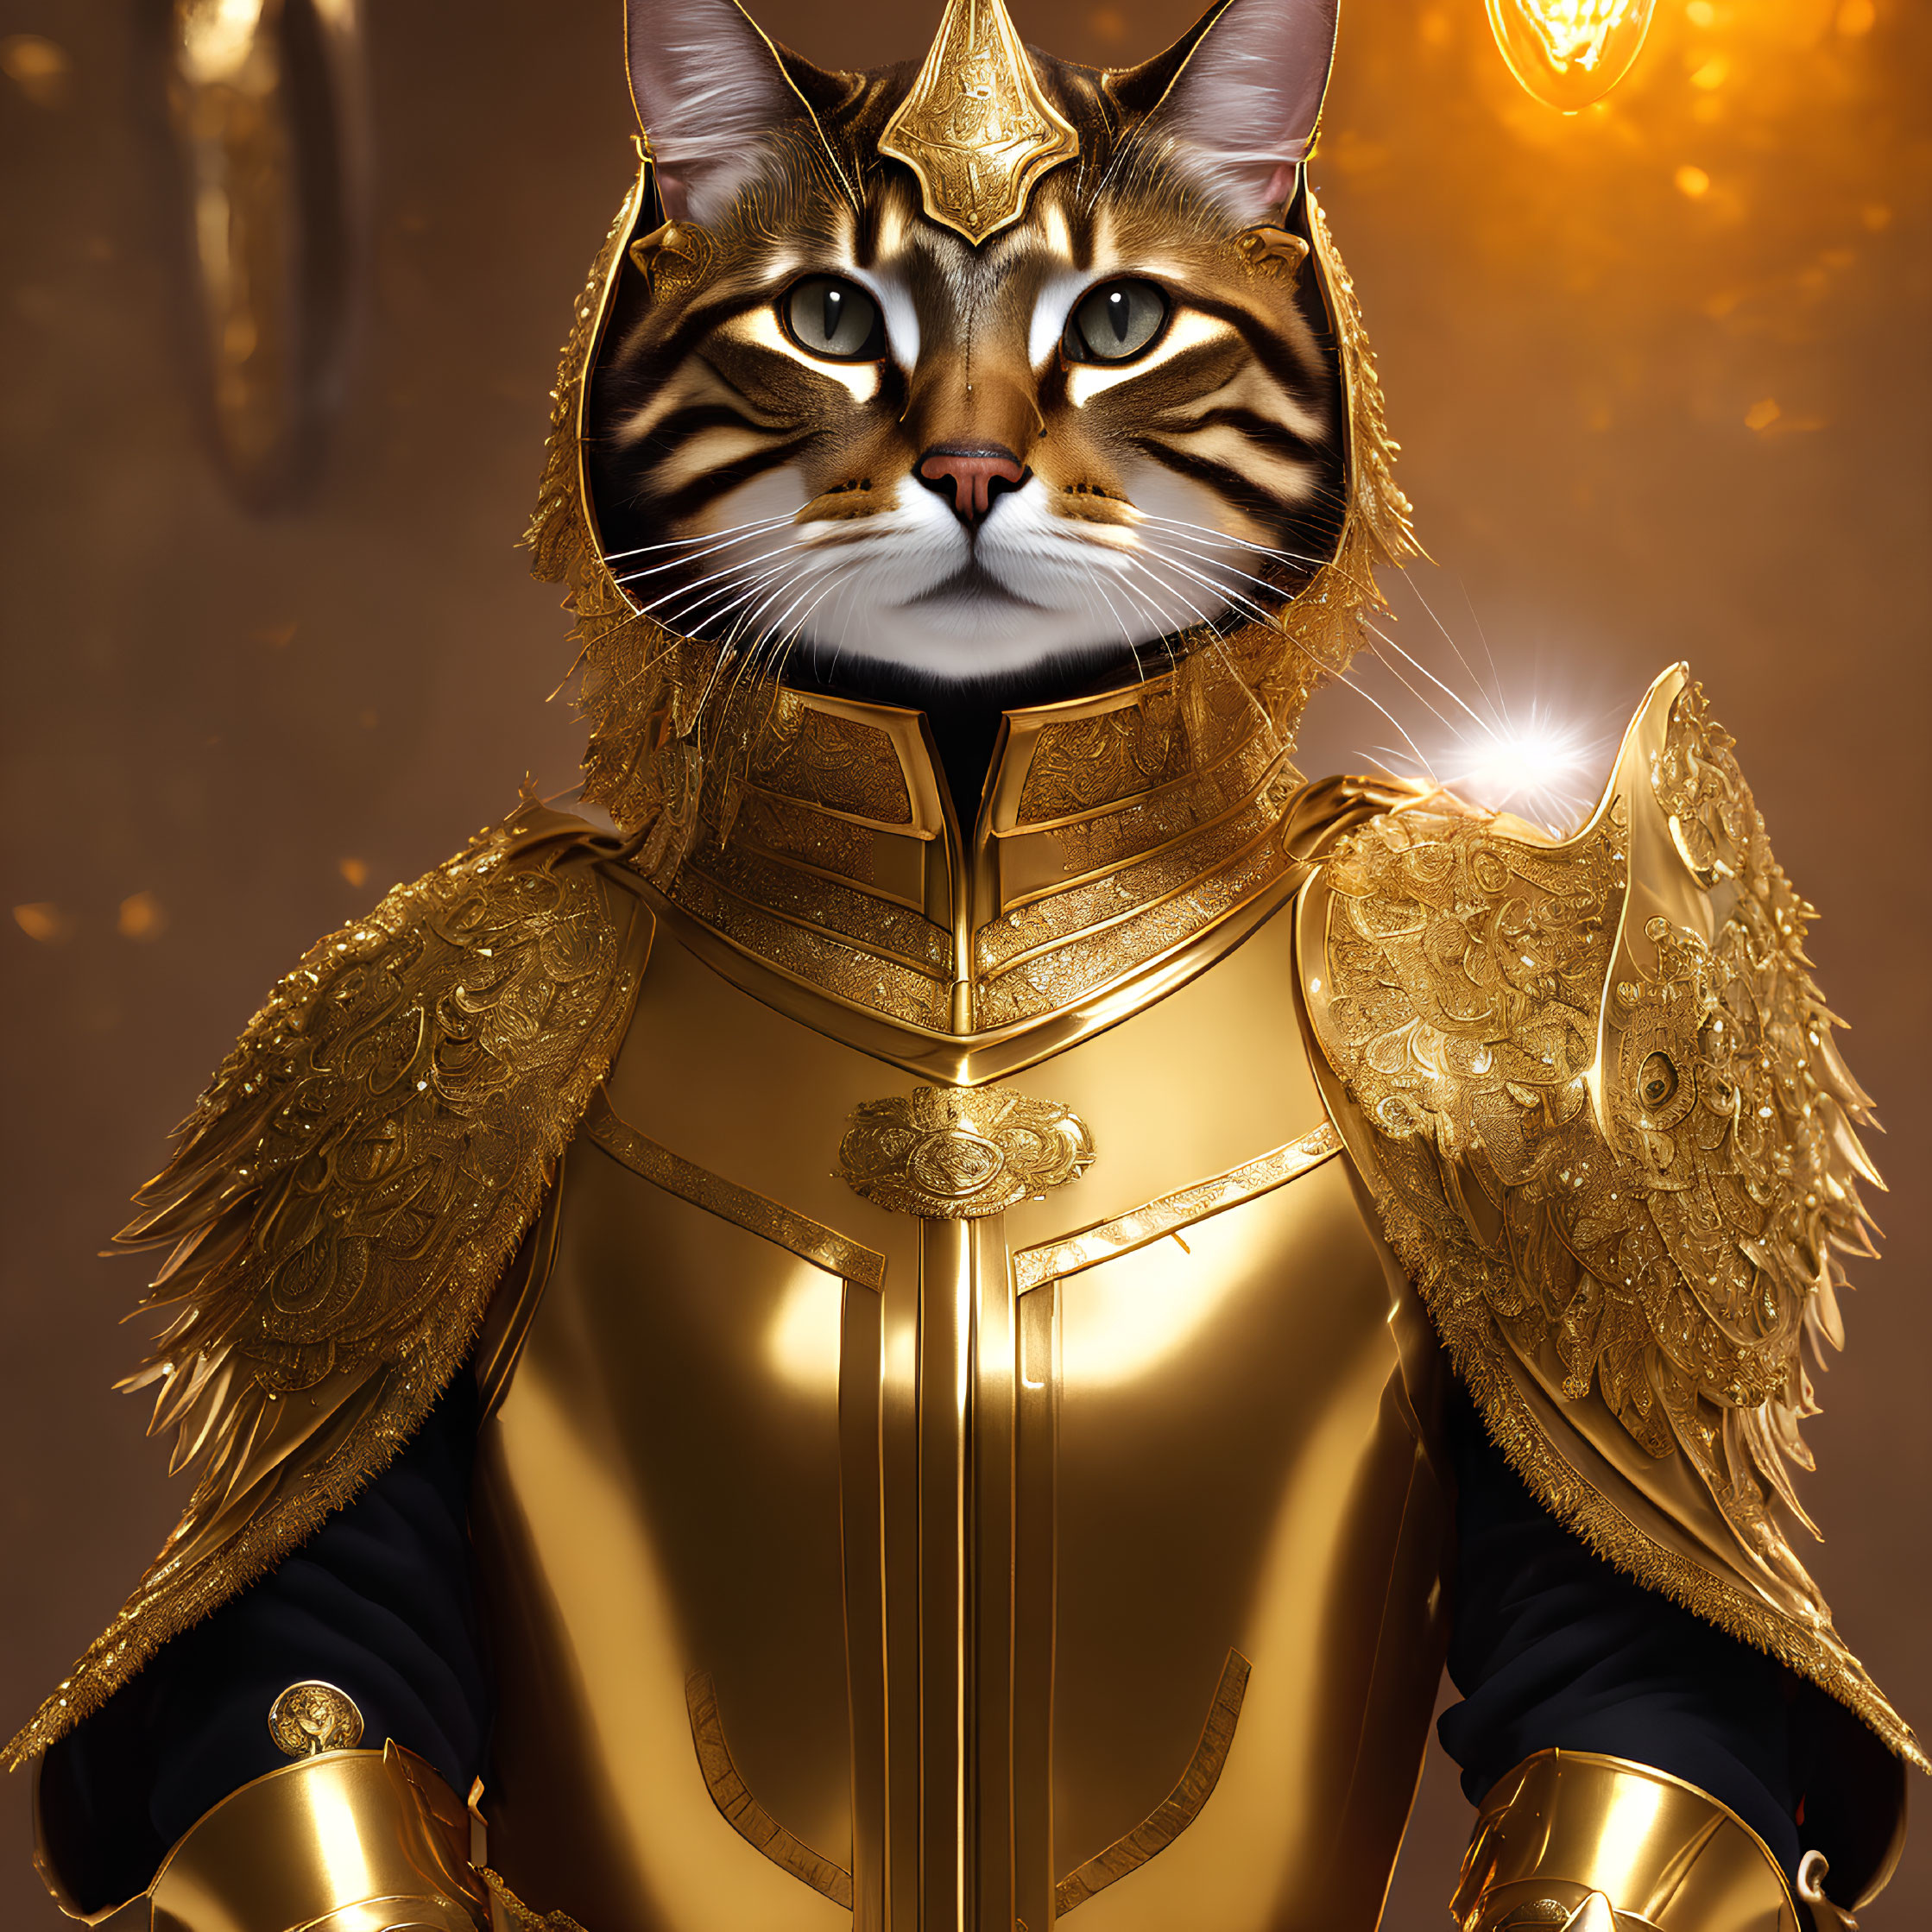 Regal Cat in Golden Armor with Stern Expression